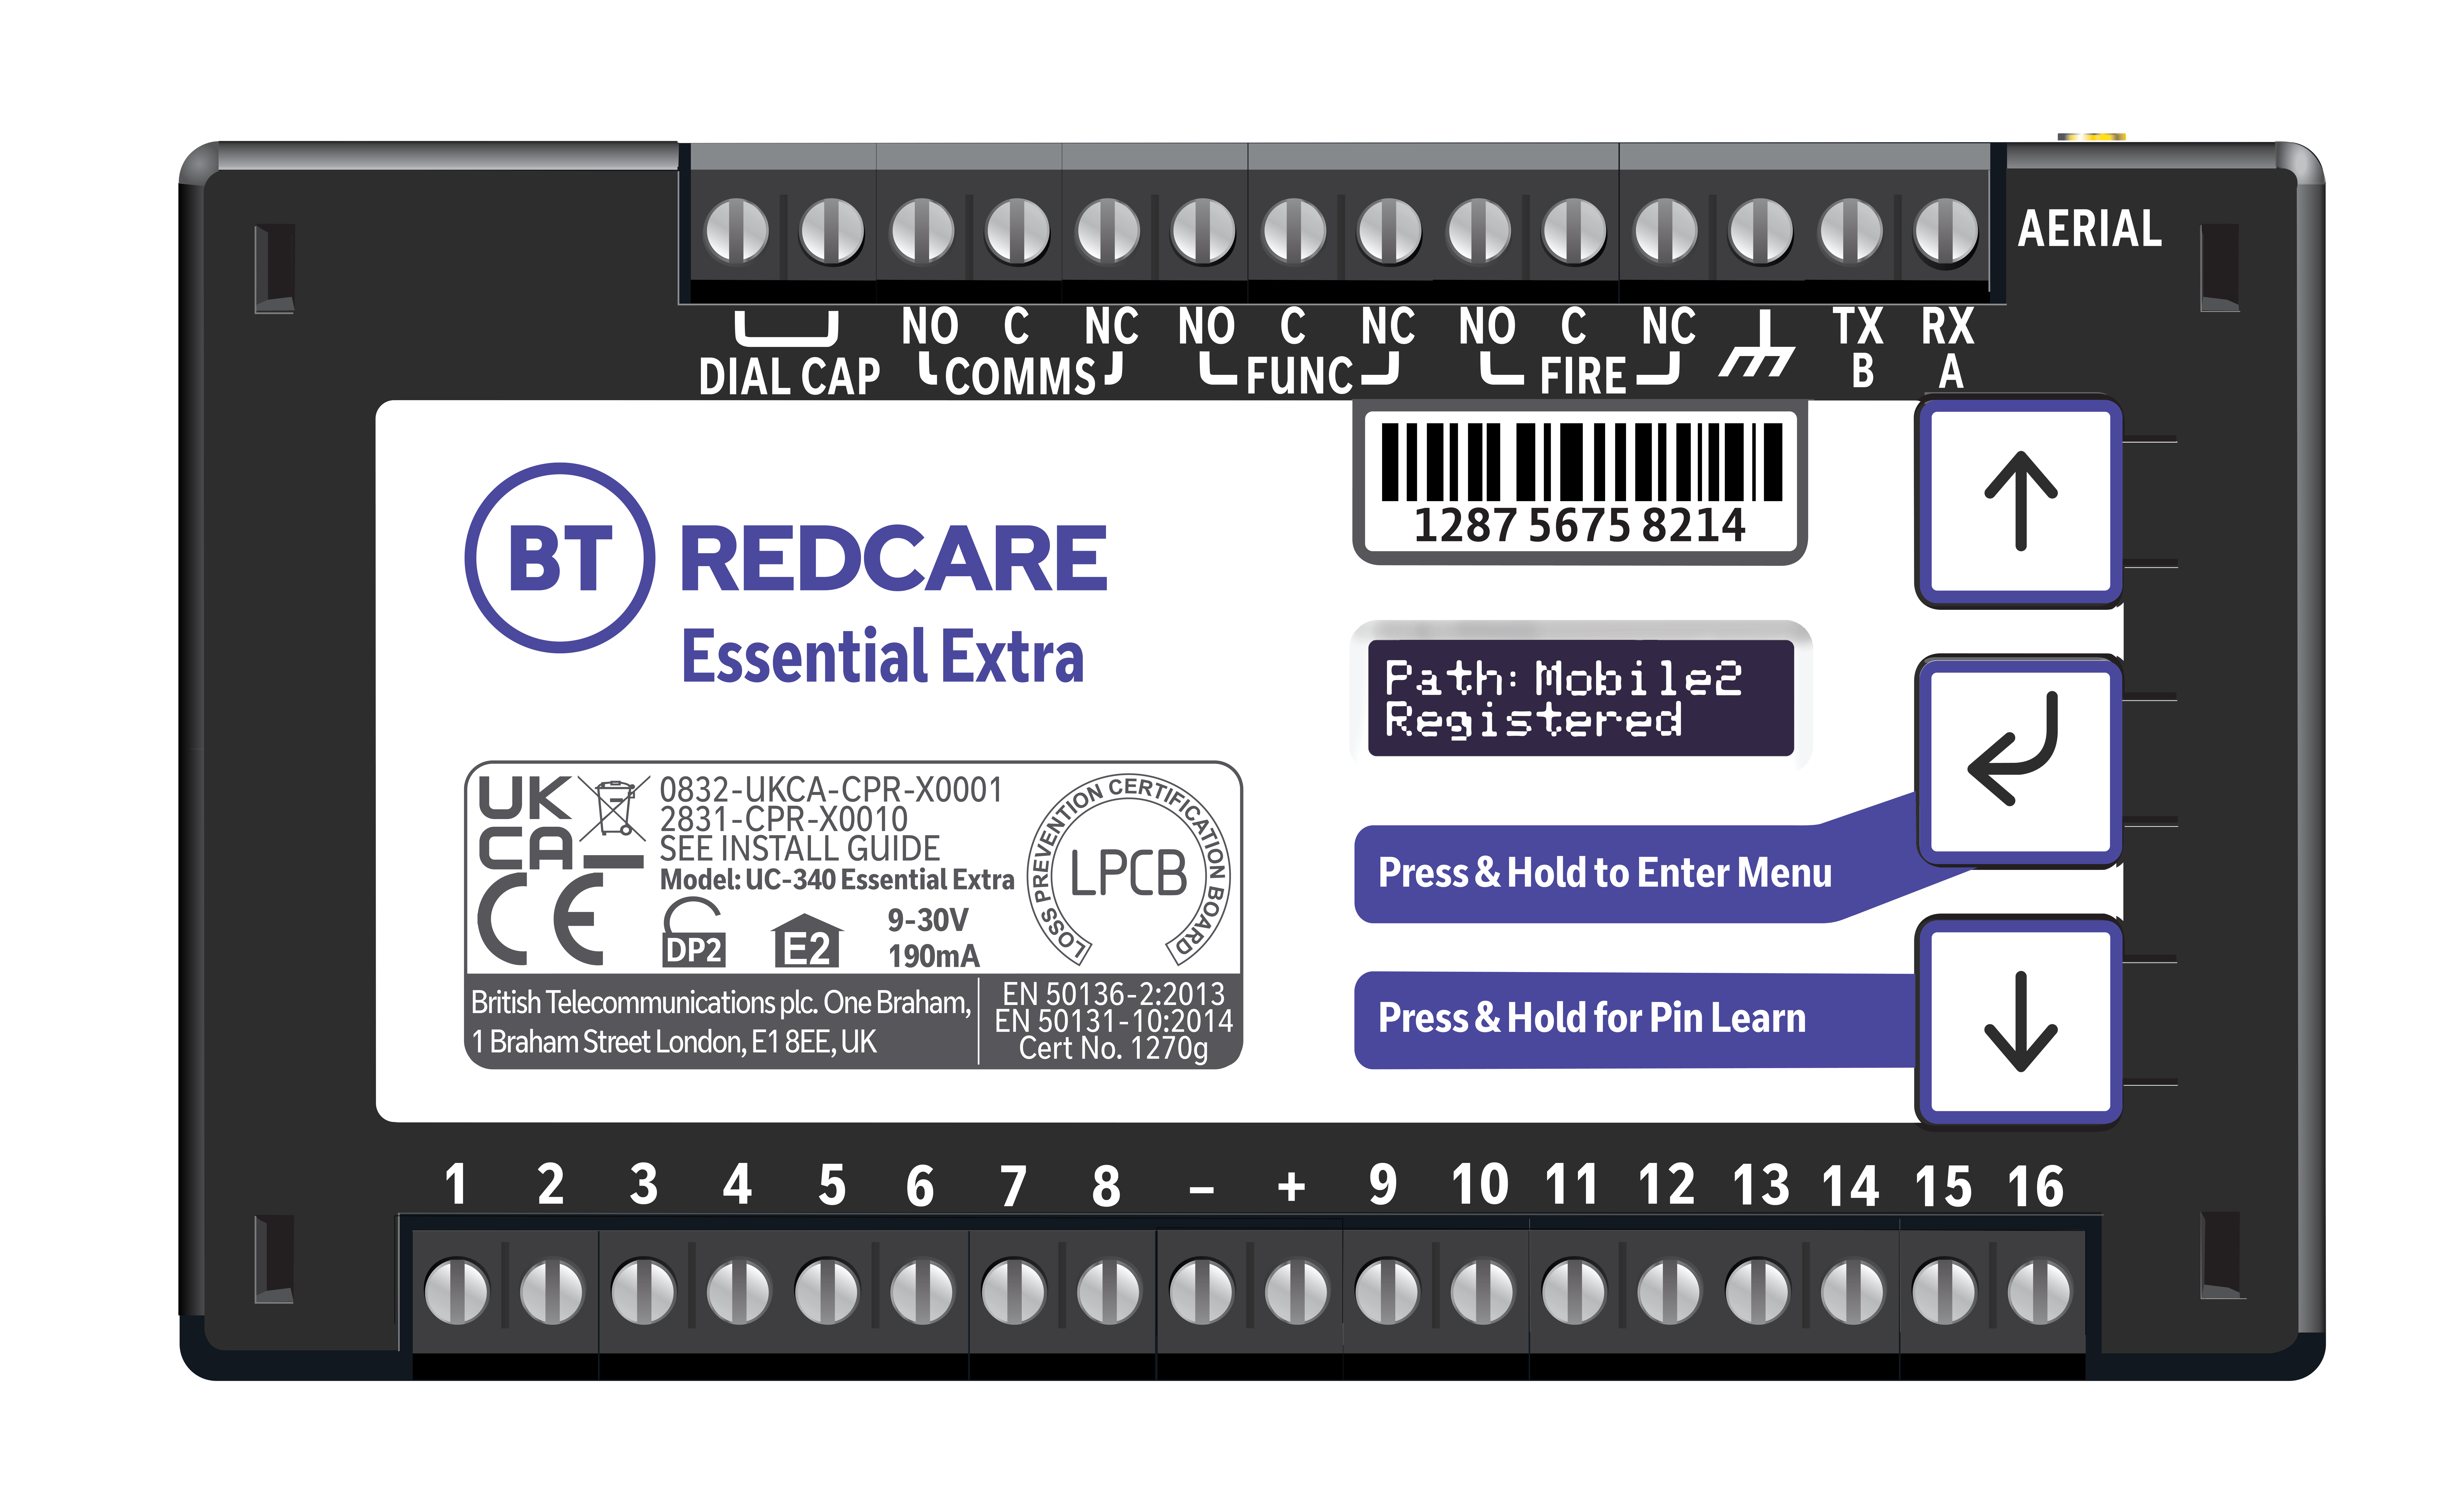 BT Redcare gain multiple benefits from LPCB third-party certification